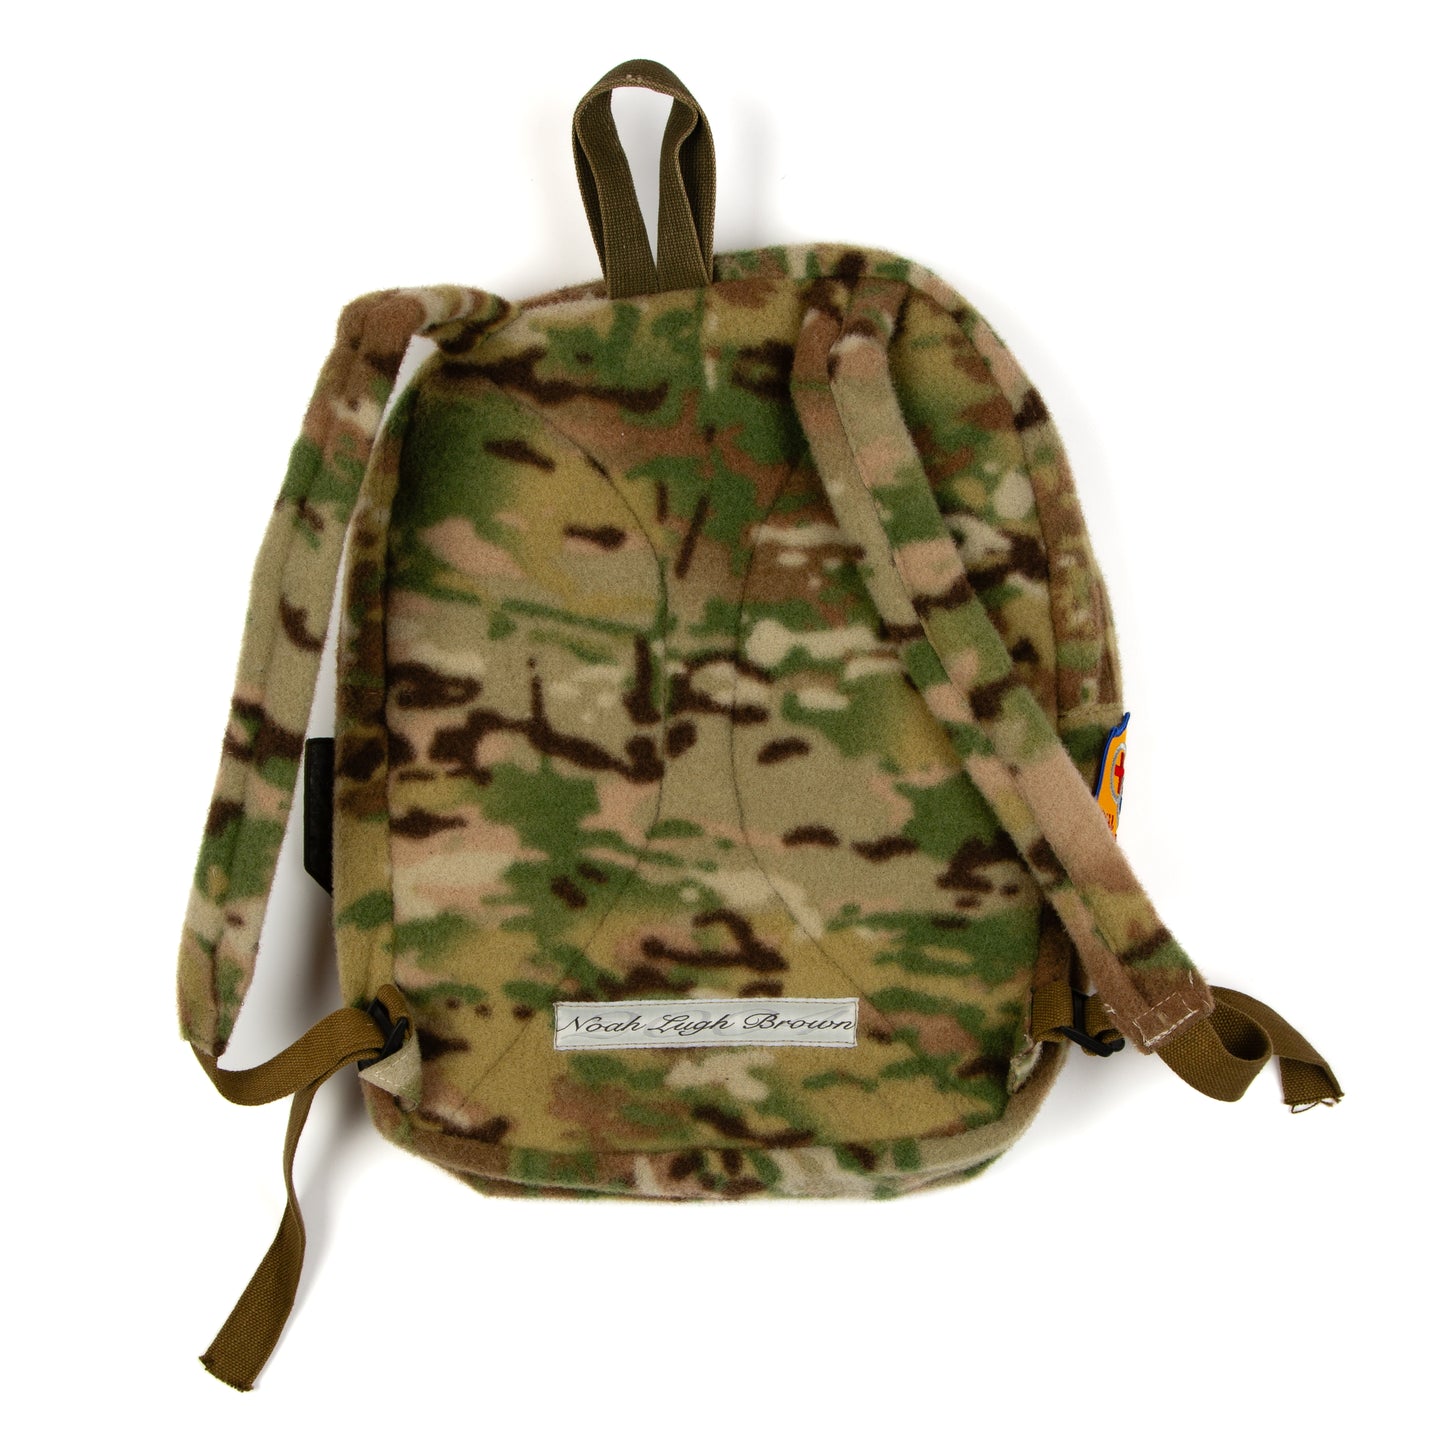 "PATCH" Camo Velcro Backpack